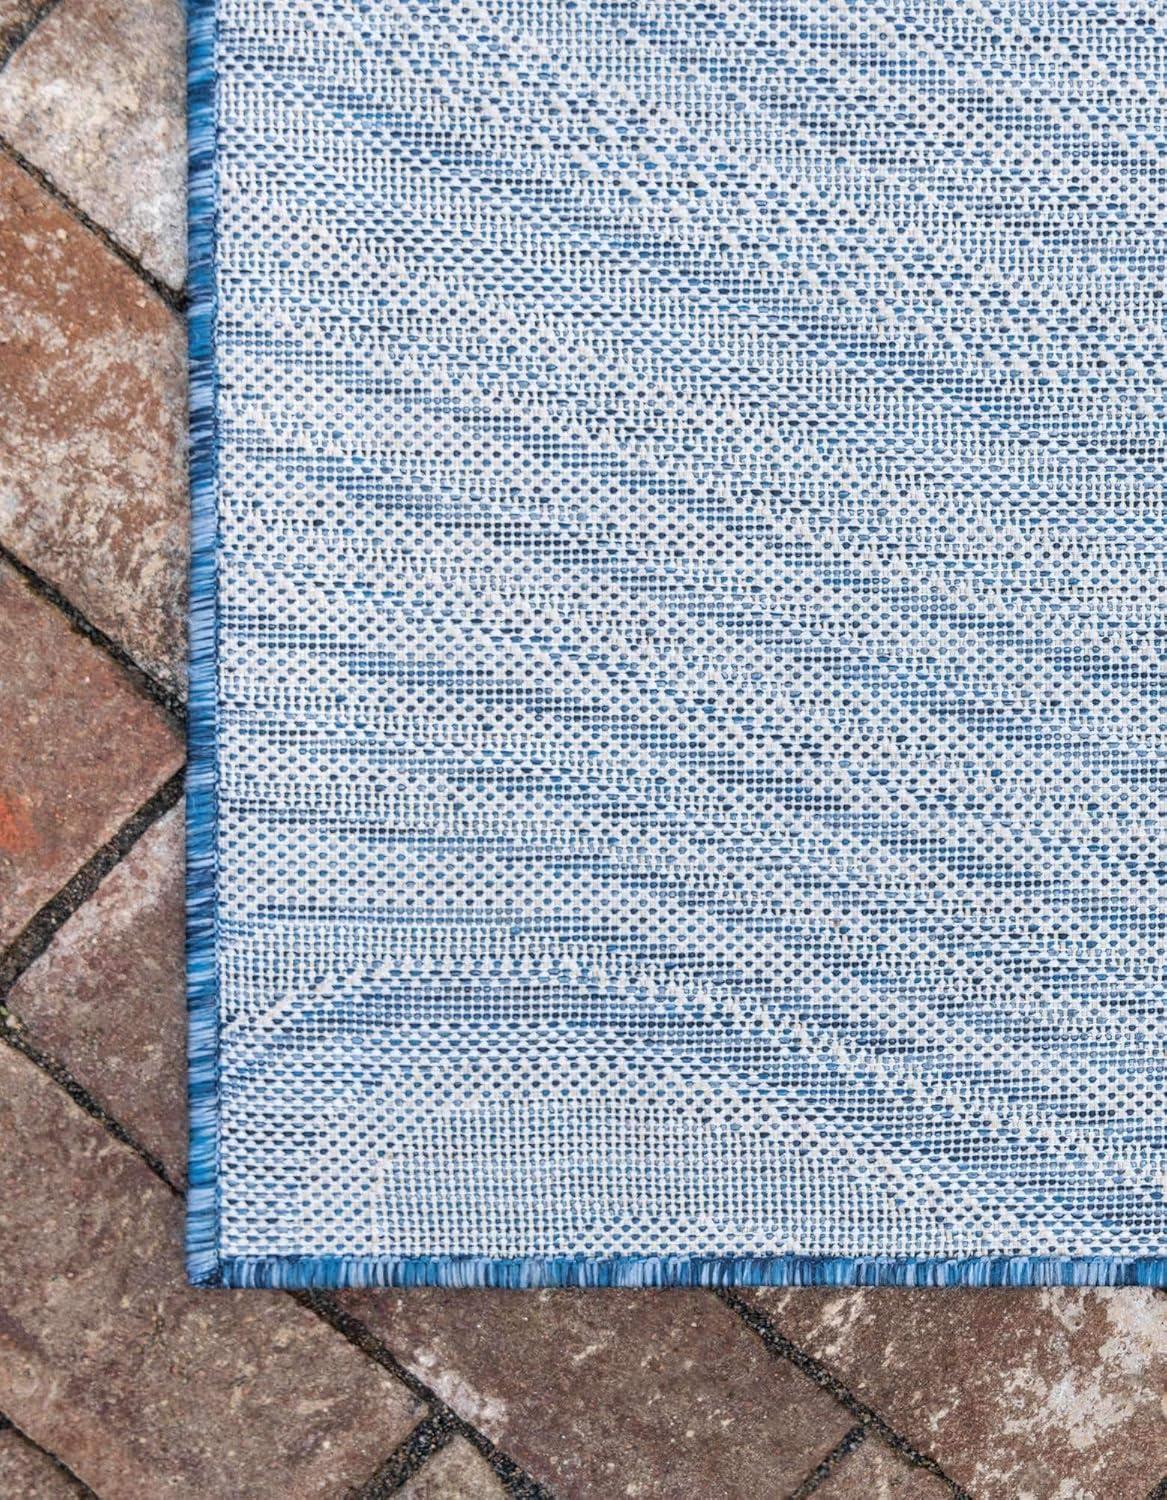 Modern Abstract Blue Wave Outdoor Rug, 5' x 8' Rectangular, Easy-Care Synthetic